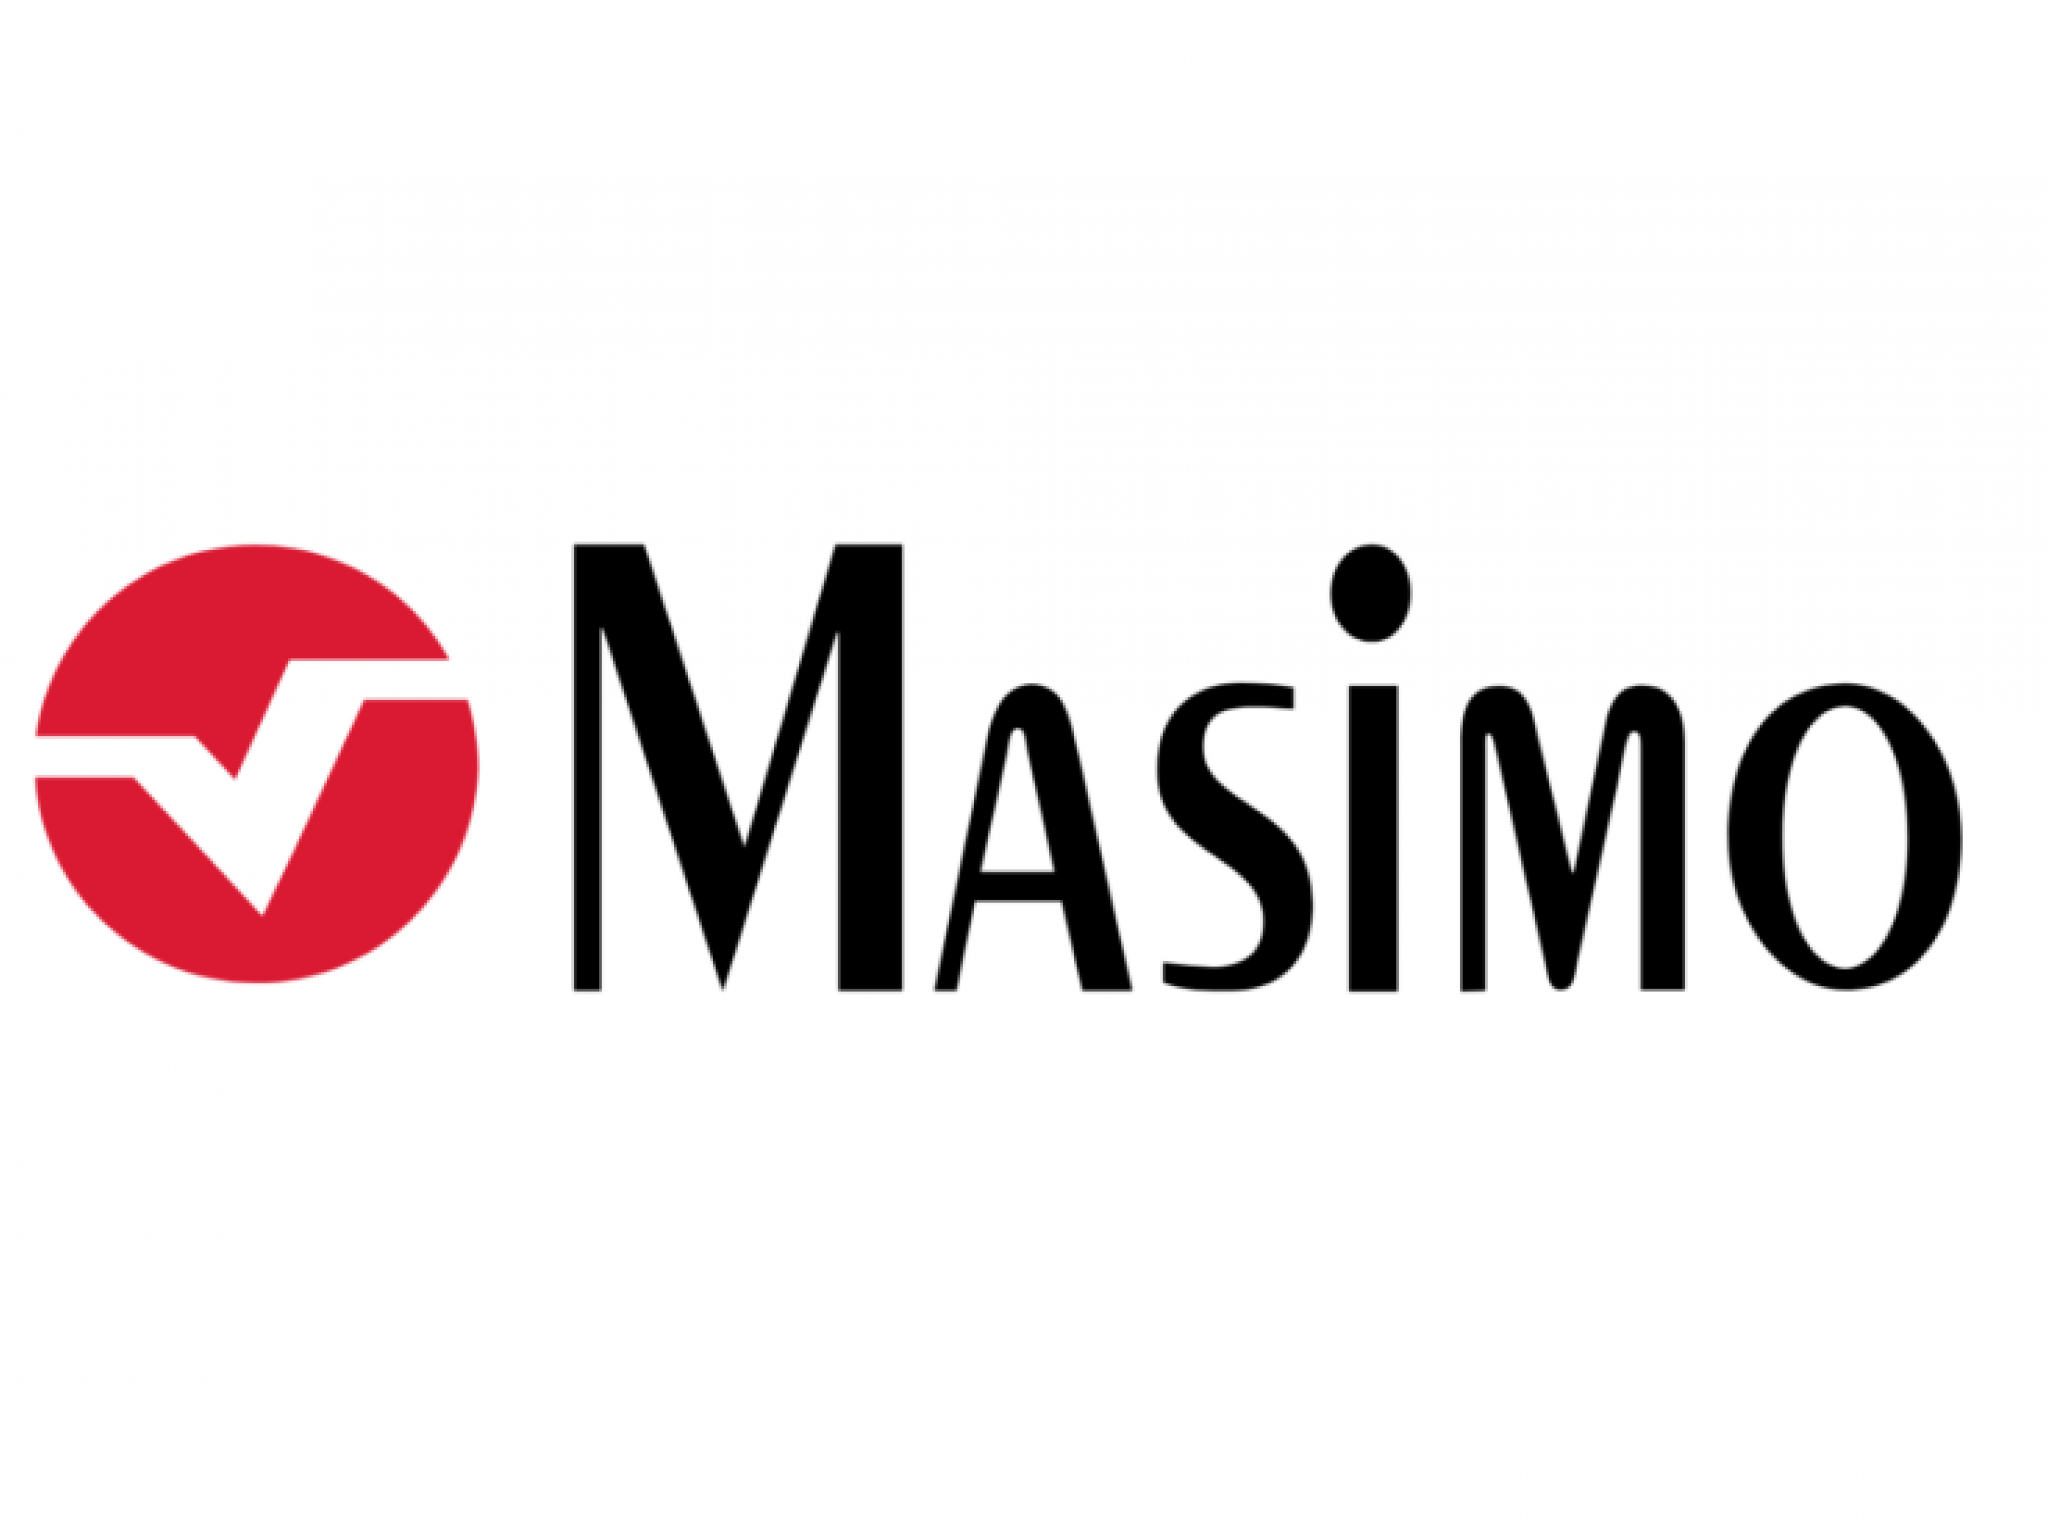  whats-going-on-with-health-technology-company-masimo-shares-today 